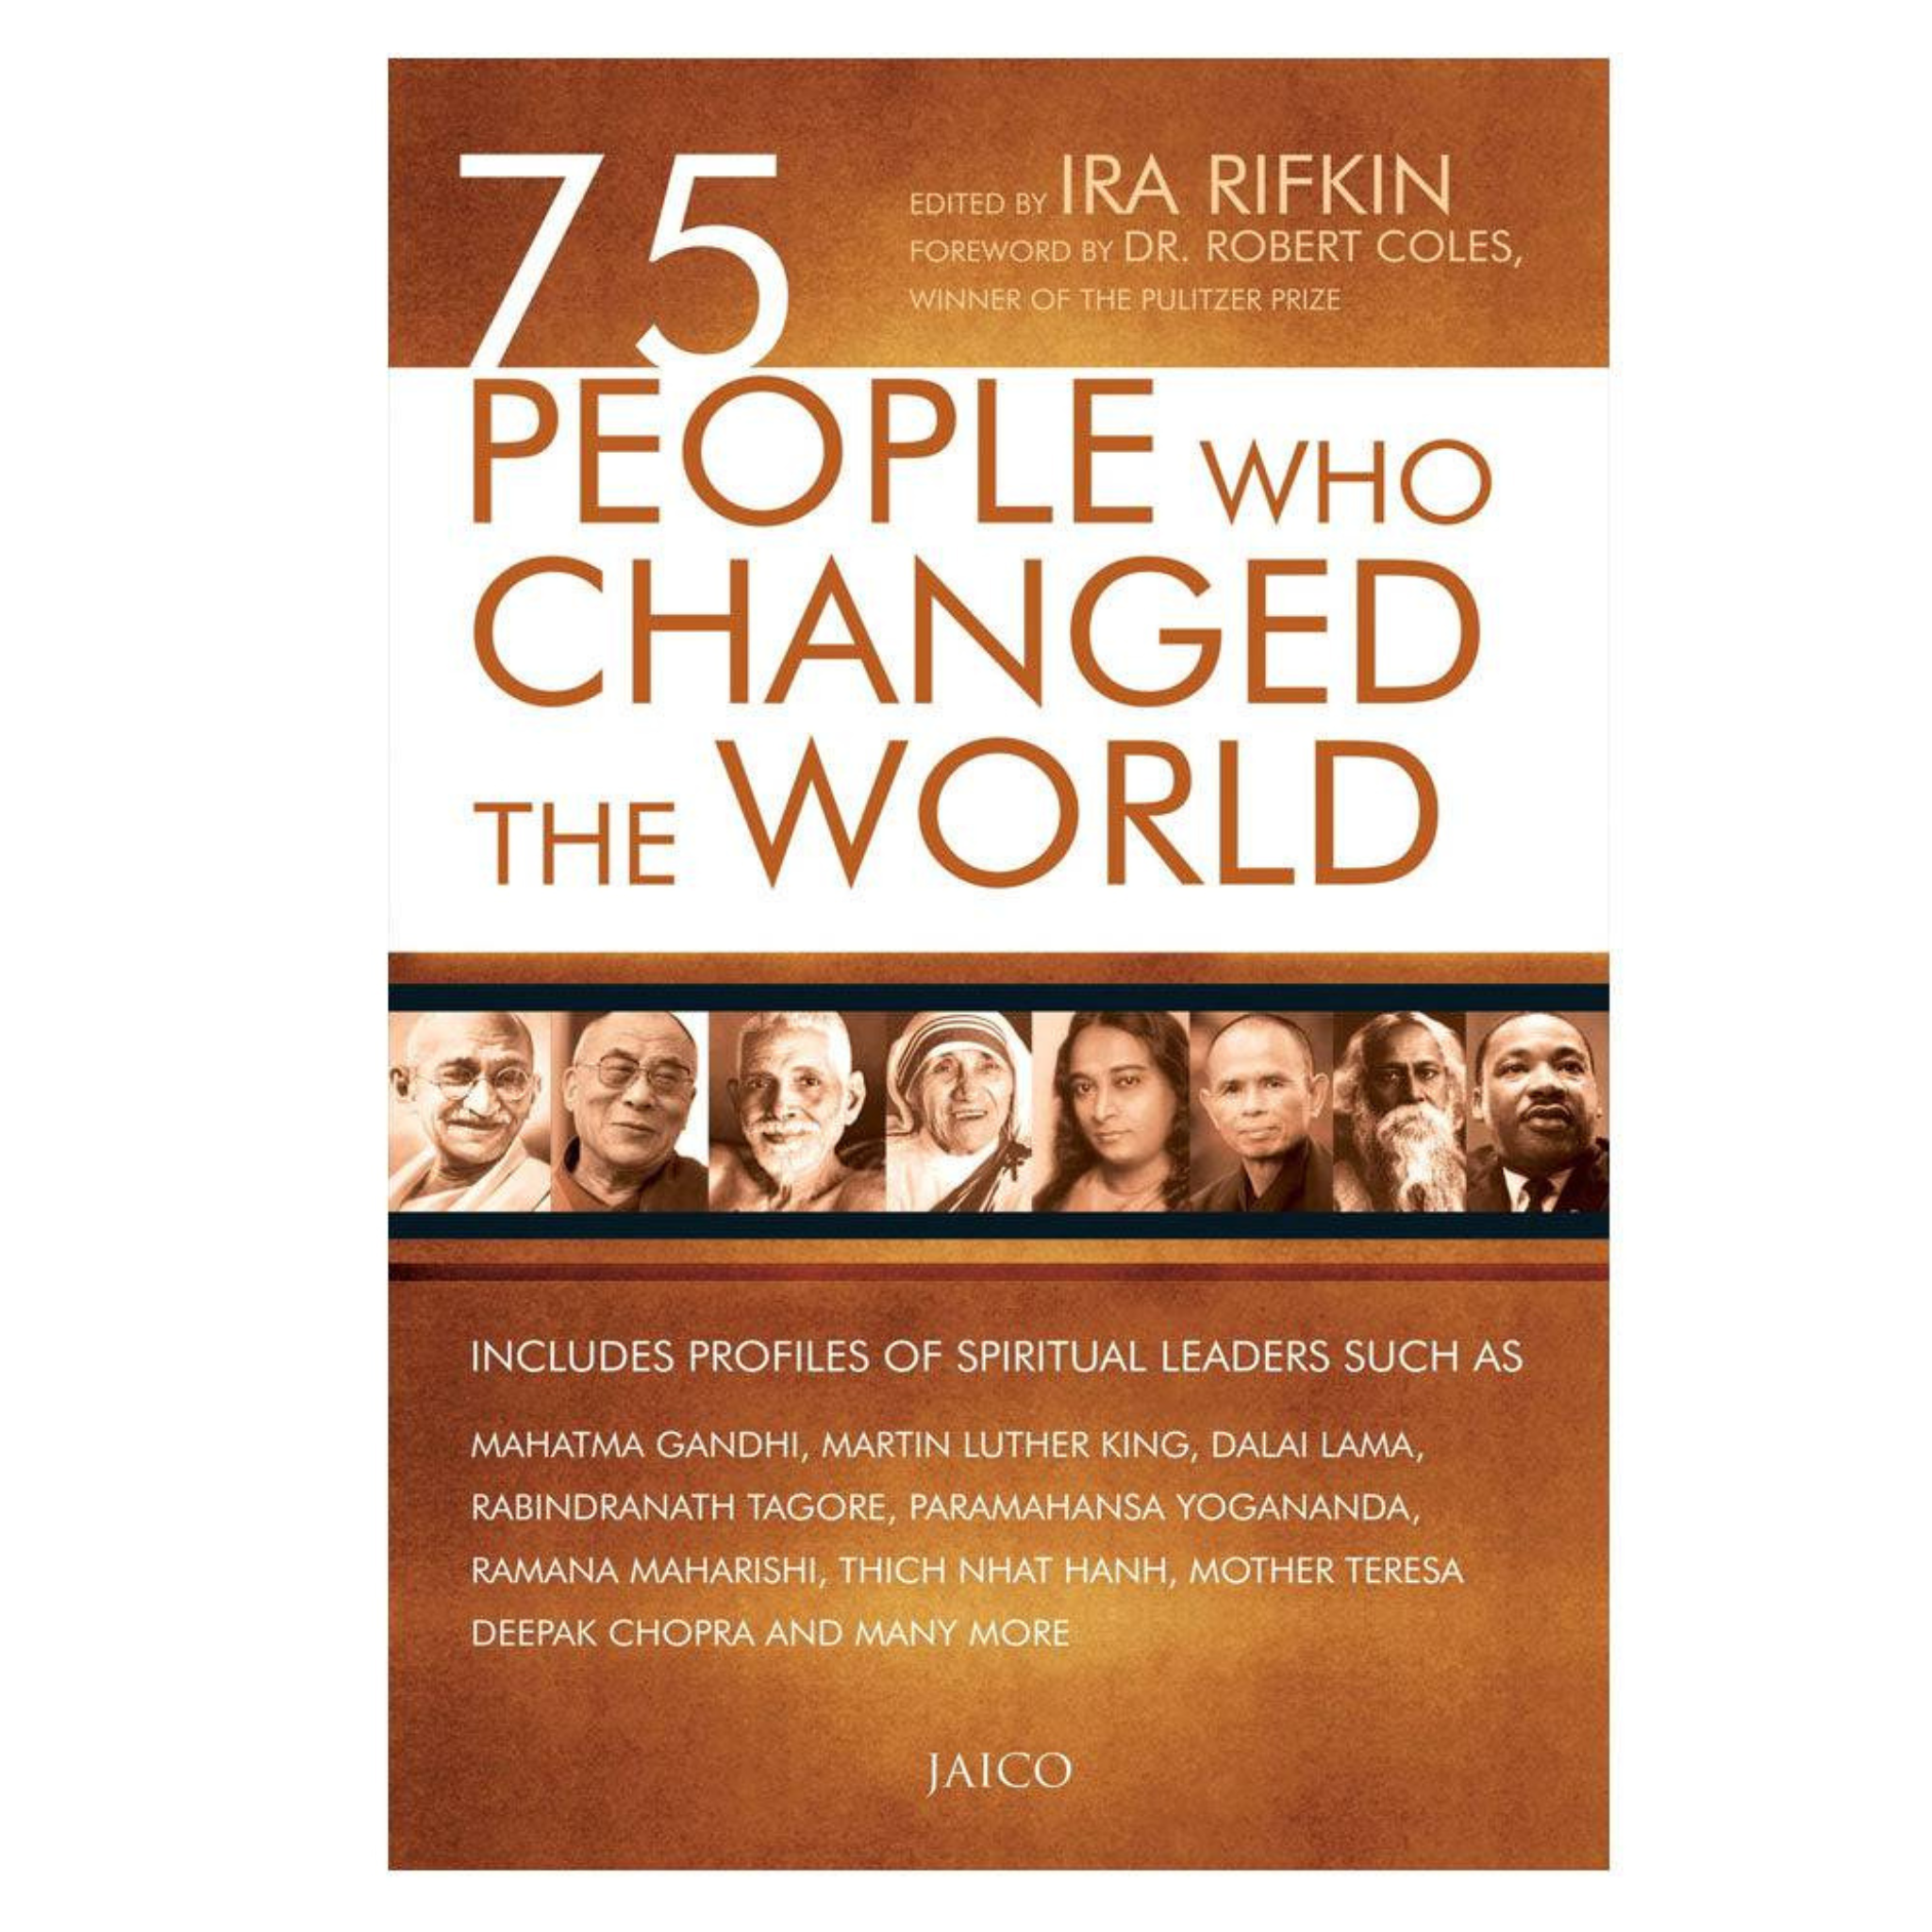 75 People Who Changed the World